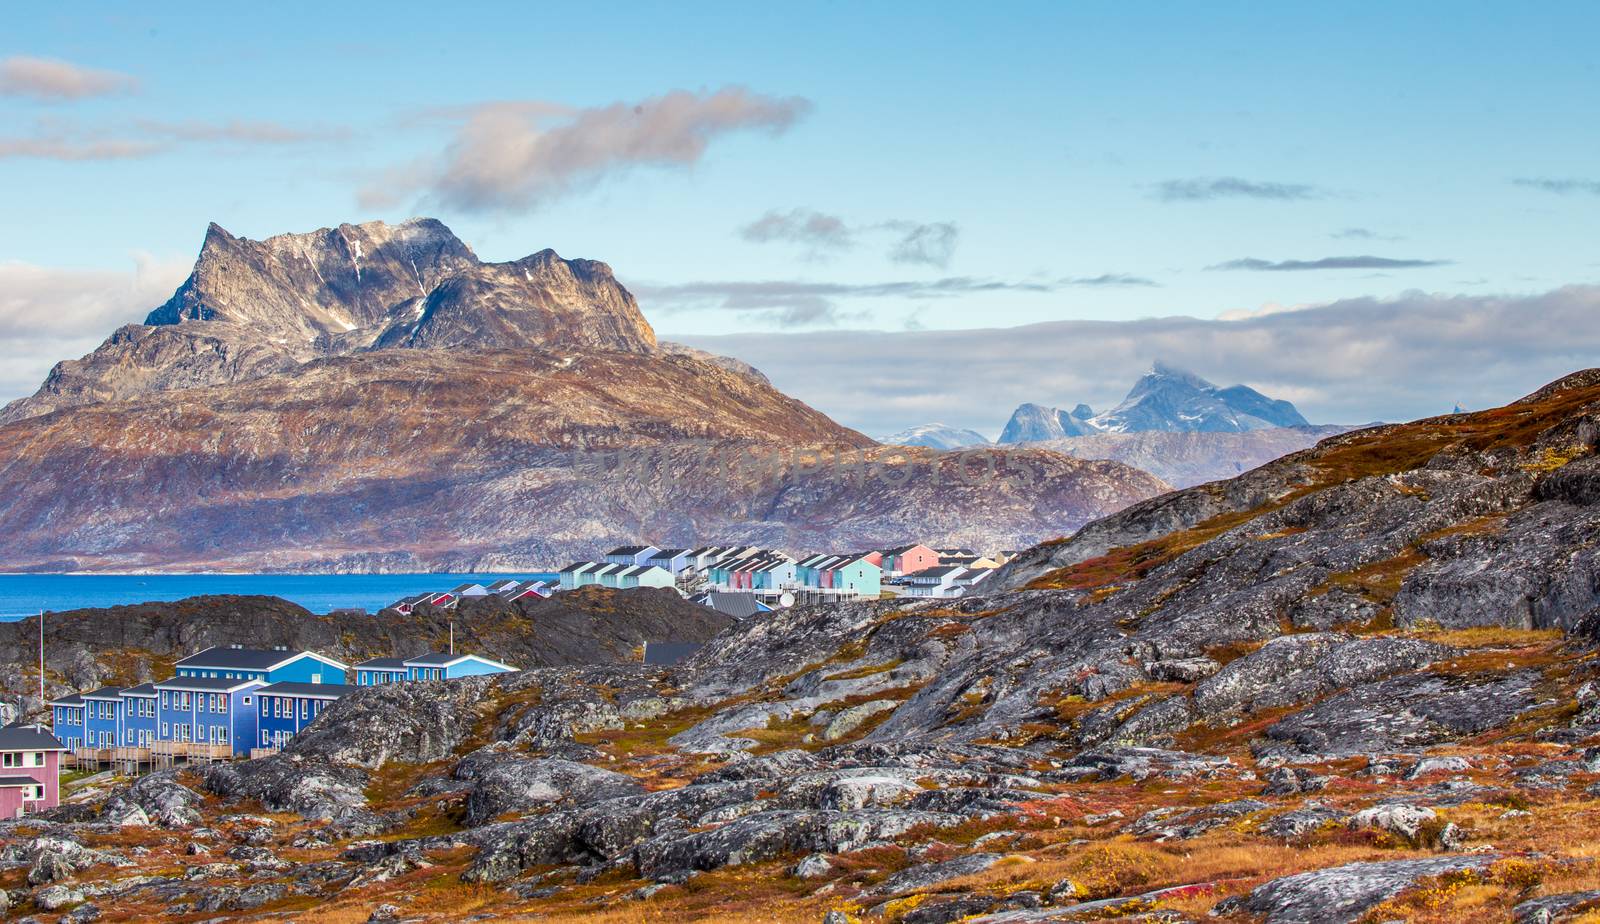 Inuit houses and cottages scattered across tundra landscape in residential suburb of Nuuk city with fjord and mountains in the background, Greenland